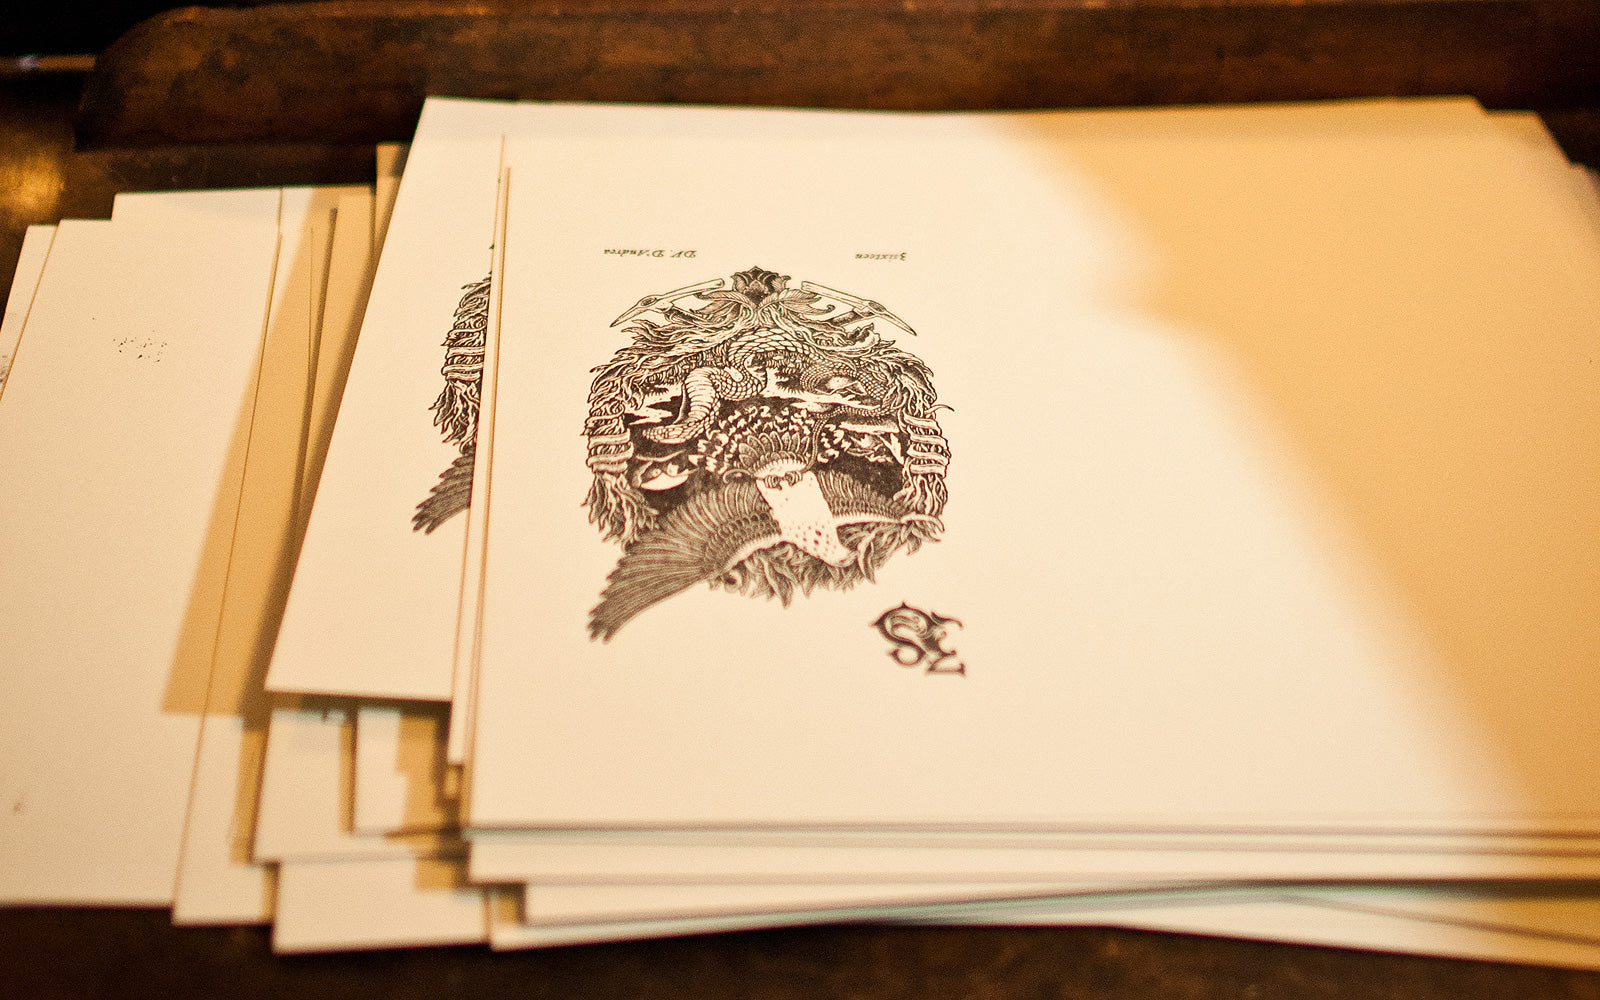 Our collaborative postcards lay on a table.